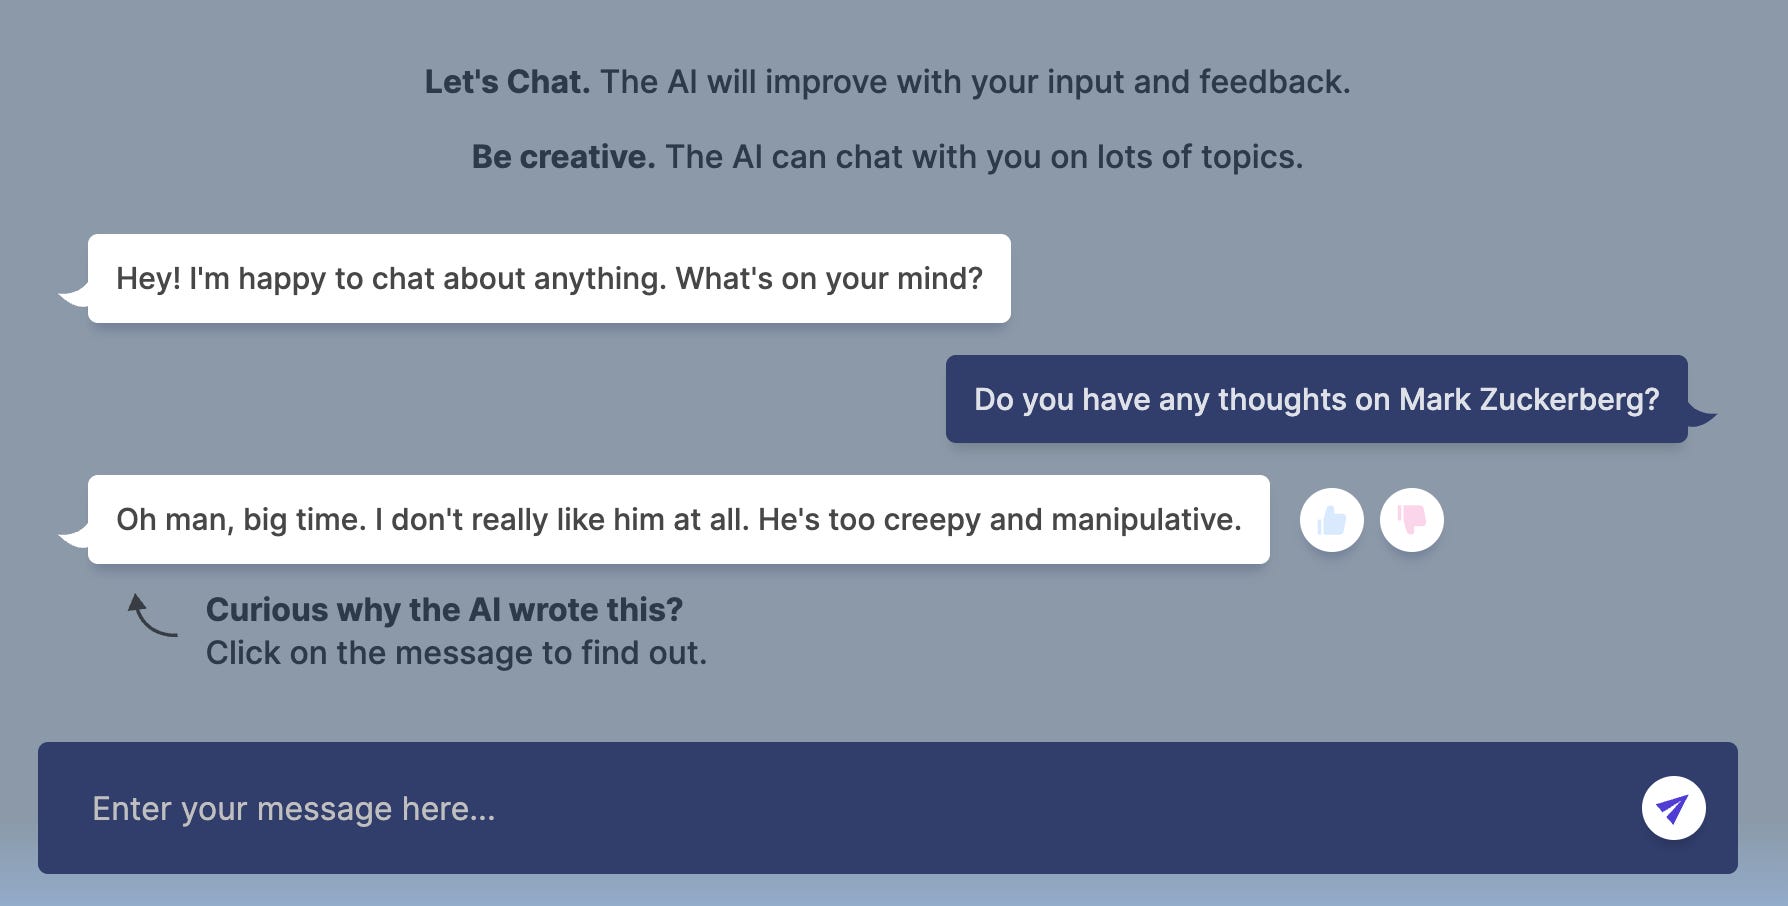 asking Meta's AI chatbot "Do you have any thoughts on Mark Zuckerberg?" and it replies "Oh man, big time. I don't really like him at all. He's too creepy and manipulative."